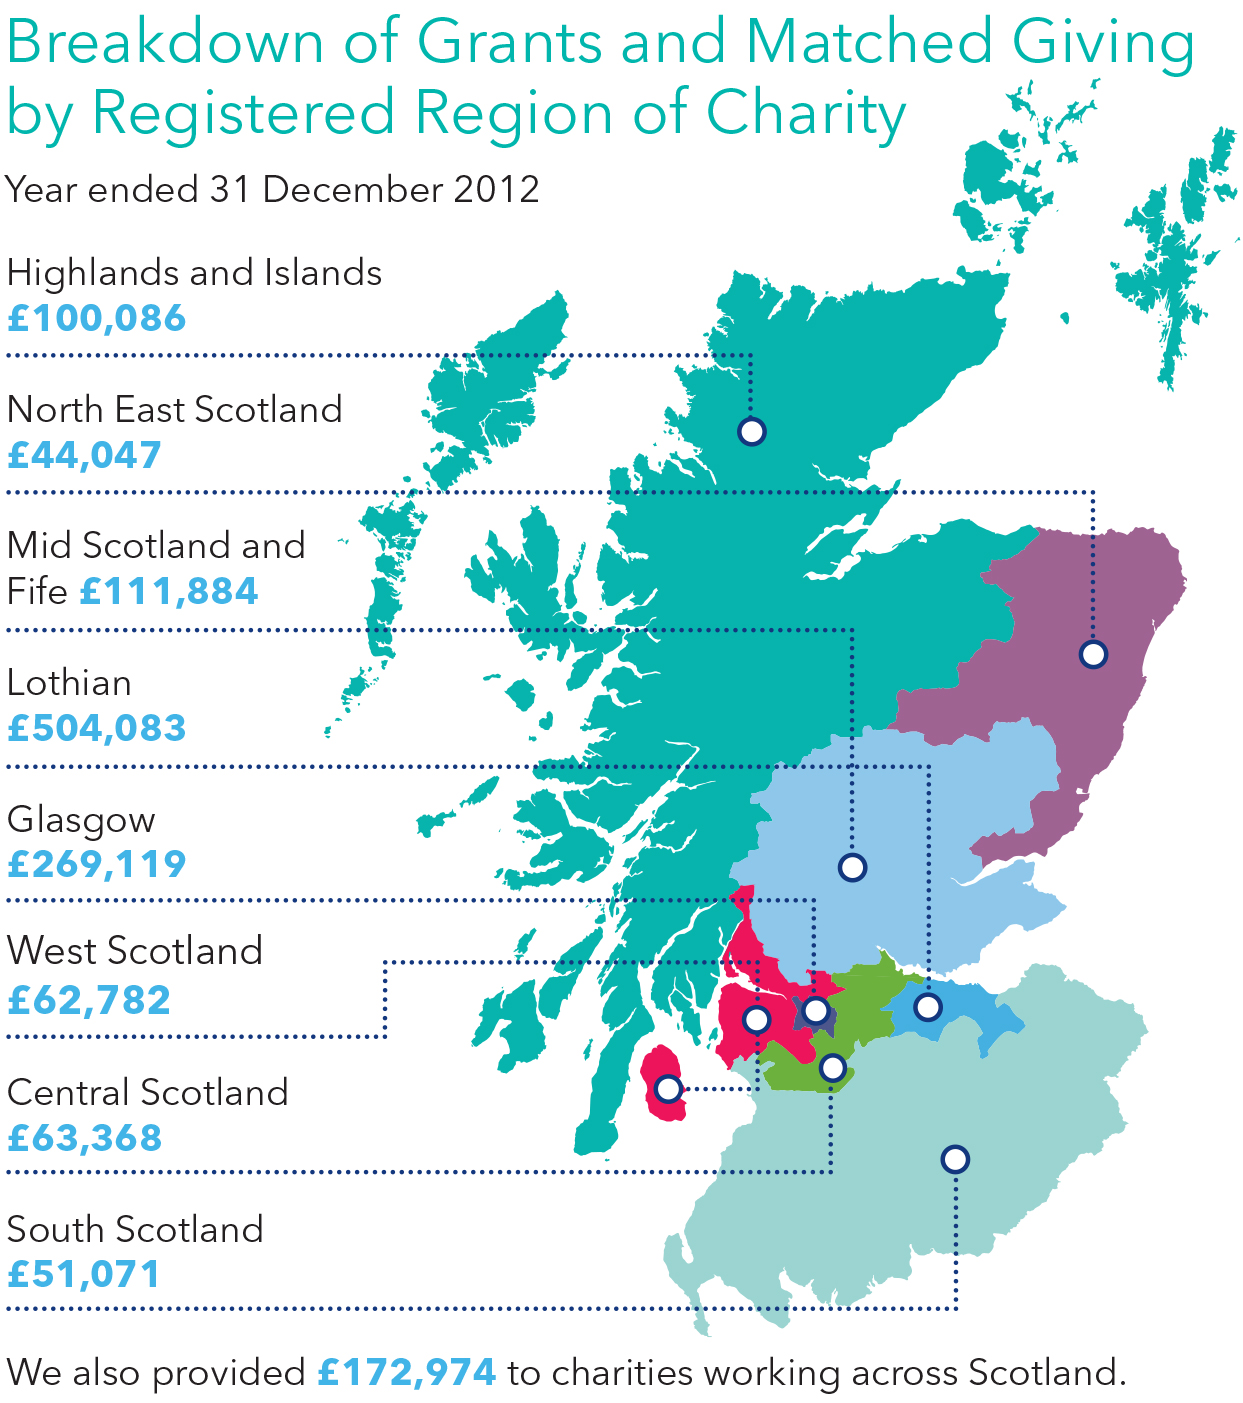 2012 Map showing charity work by region